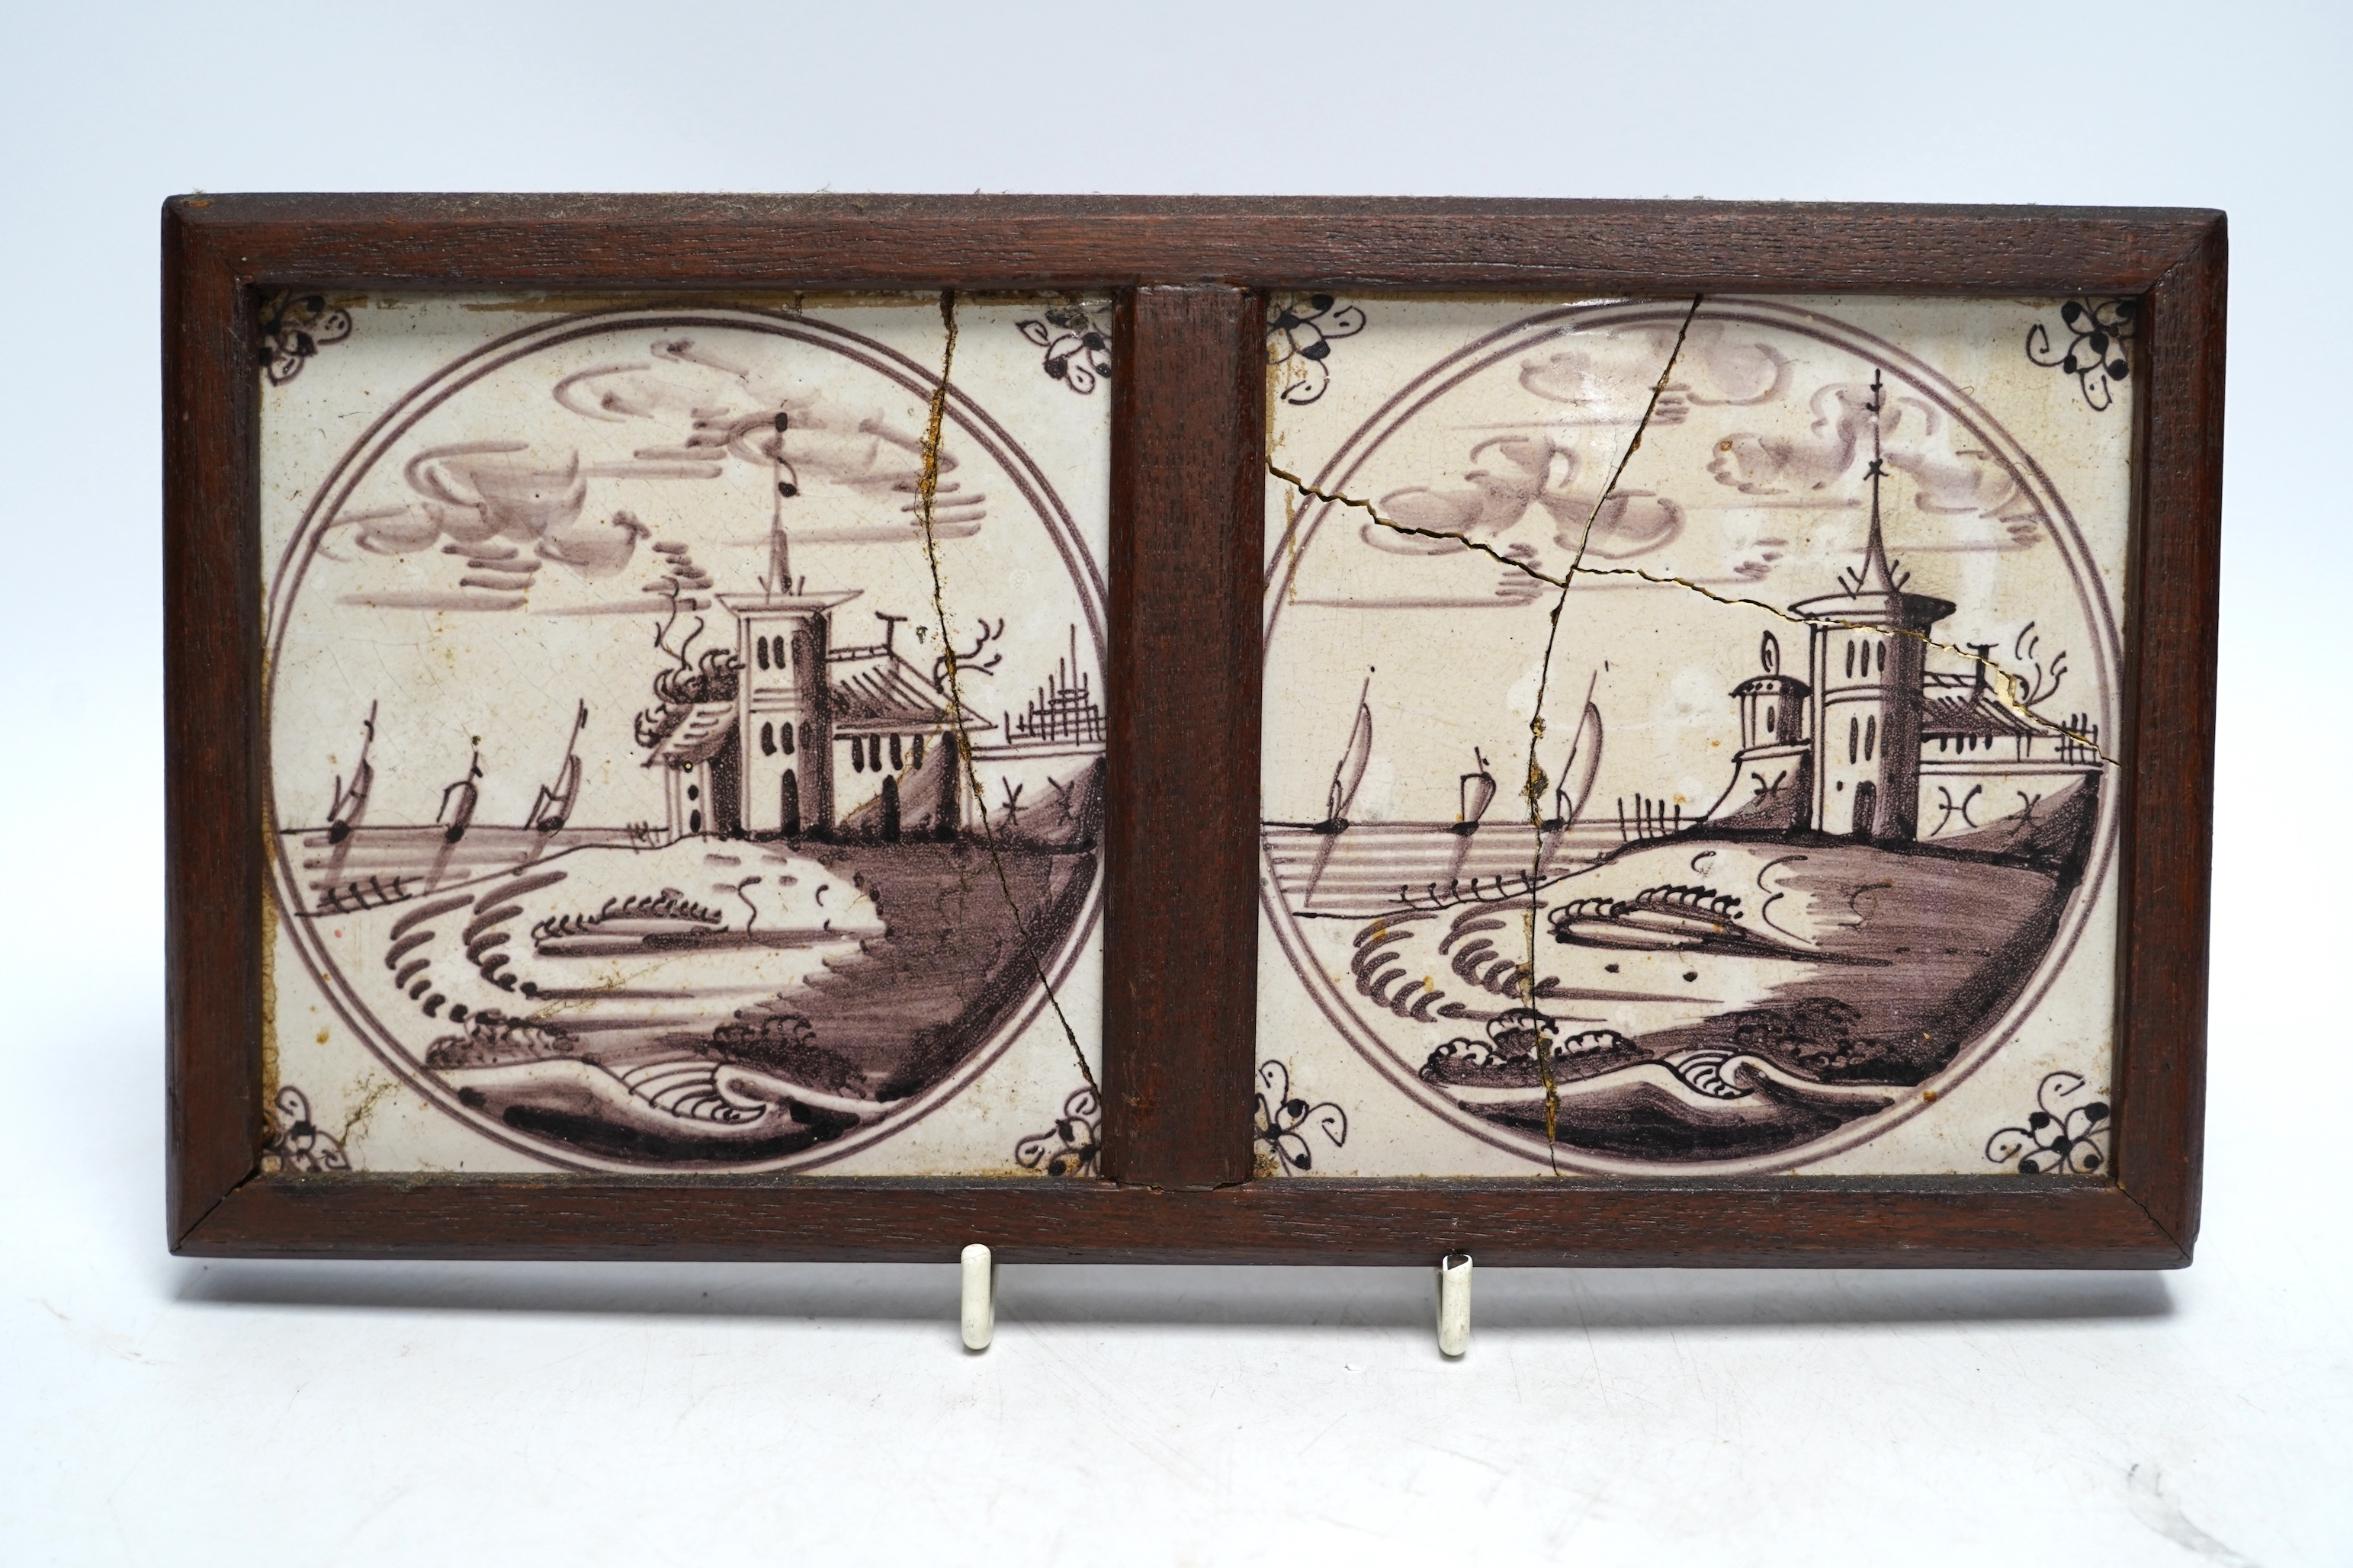 An 18th century Delft polychrome plate, 23cm diameter, and two framed tiles. Condition - tiles poor, plate with usual chipping to edges